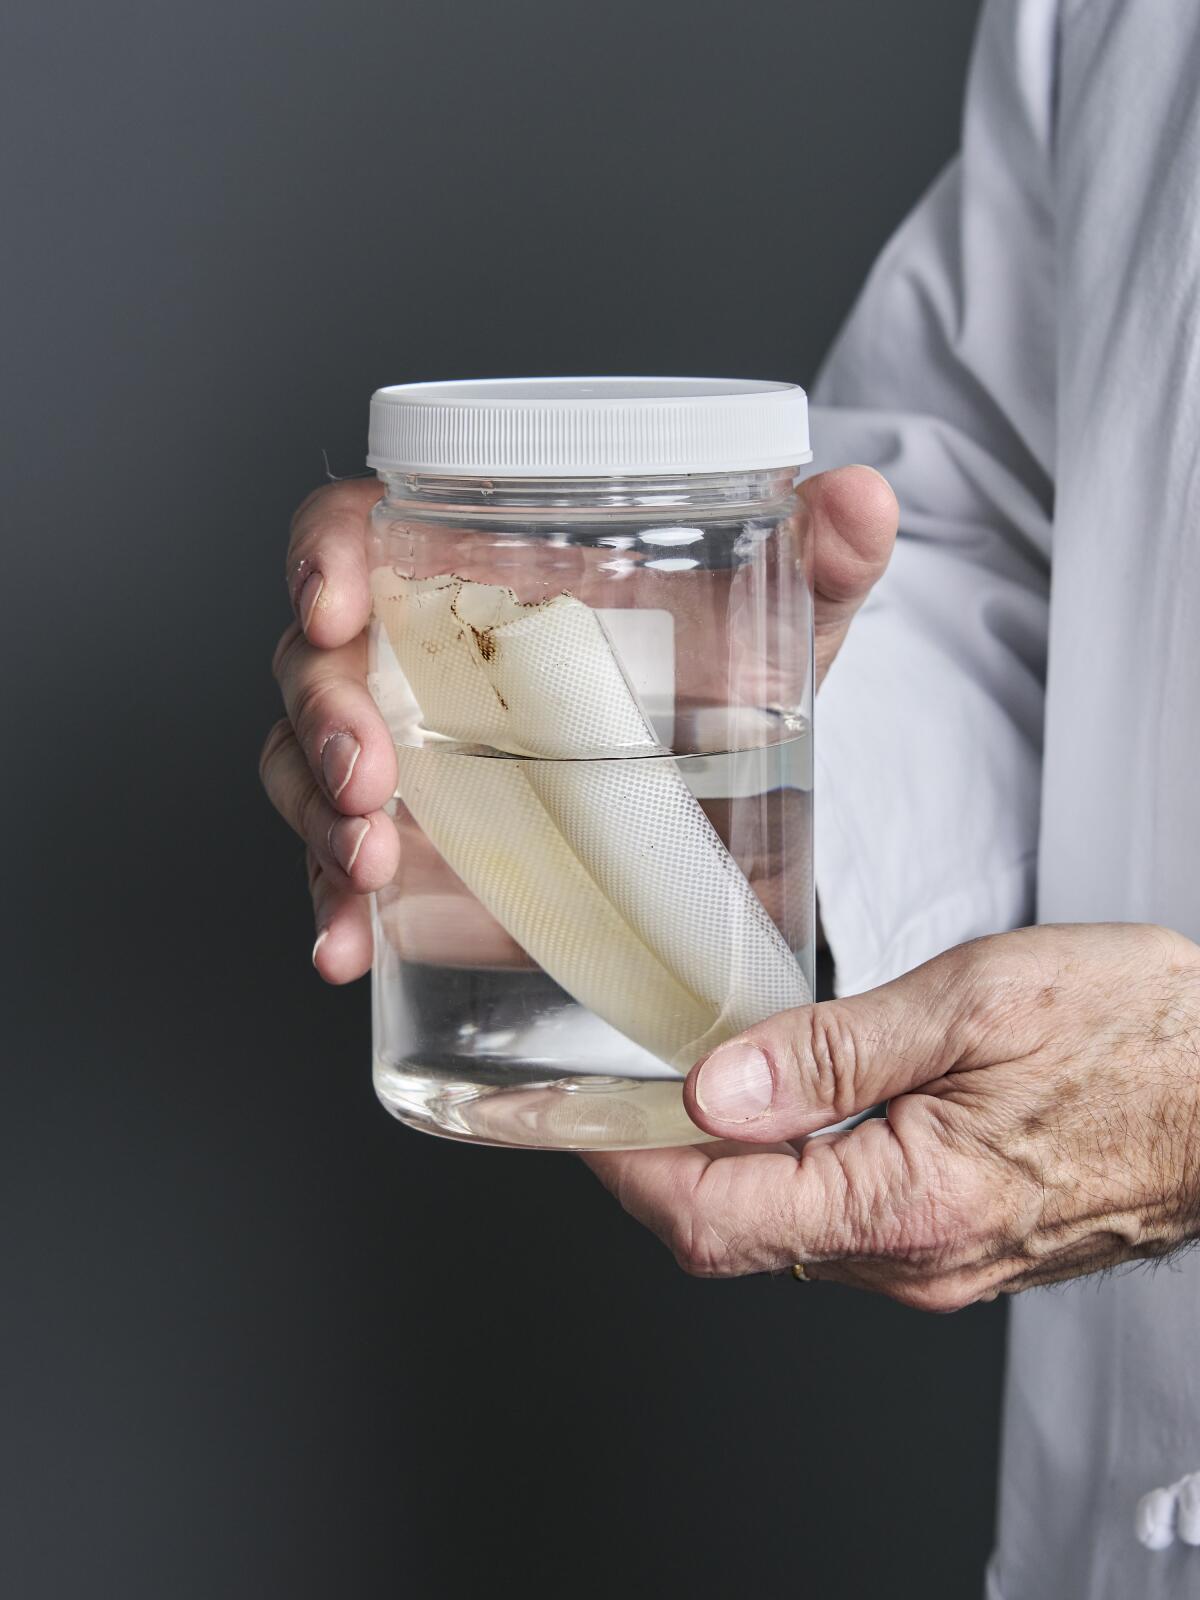 A Penuma implant, which was removed from a patient, is seen in a jar.